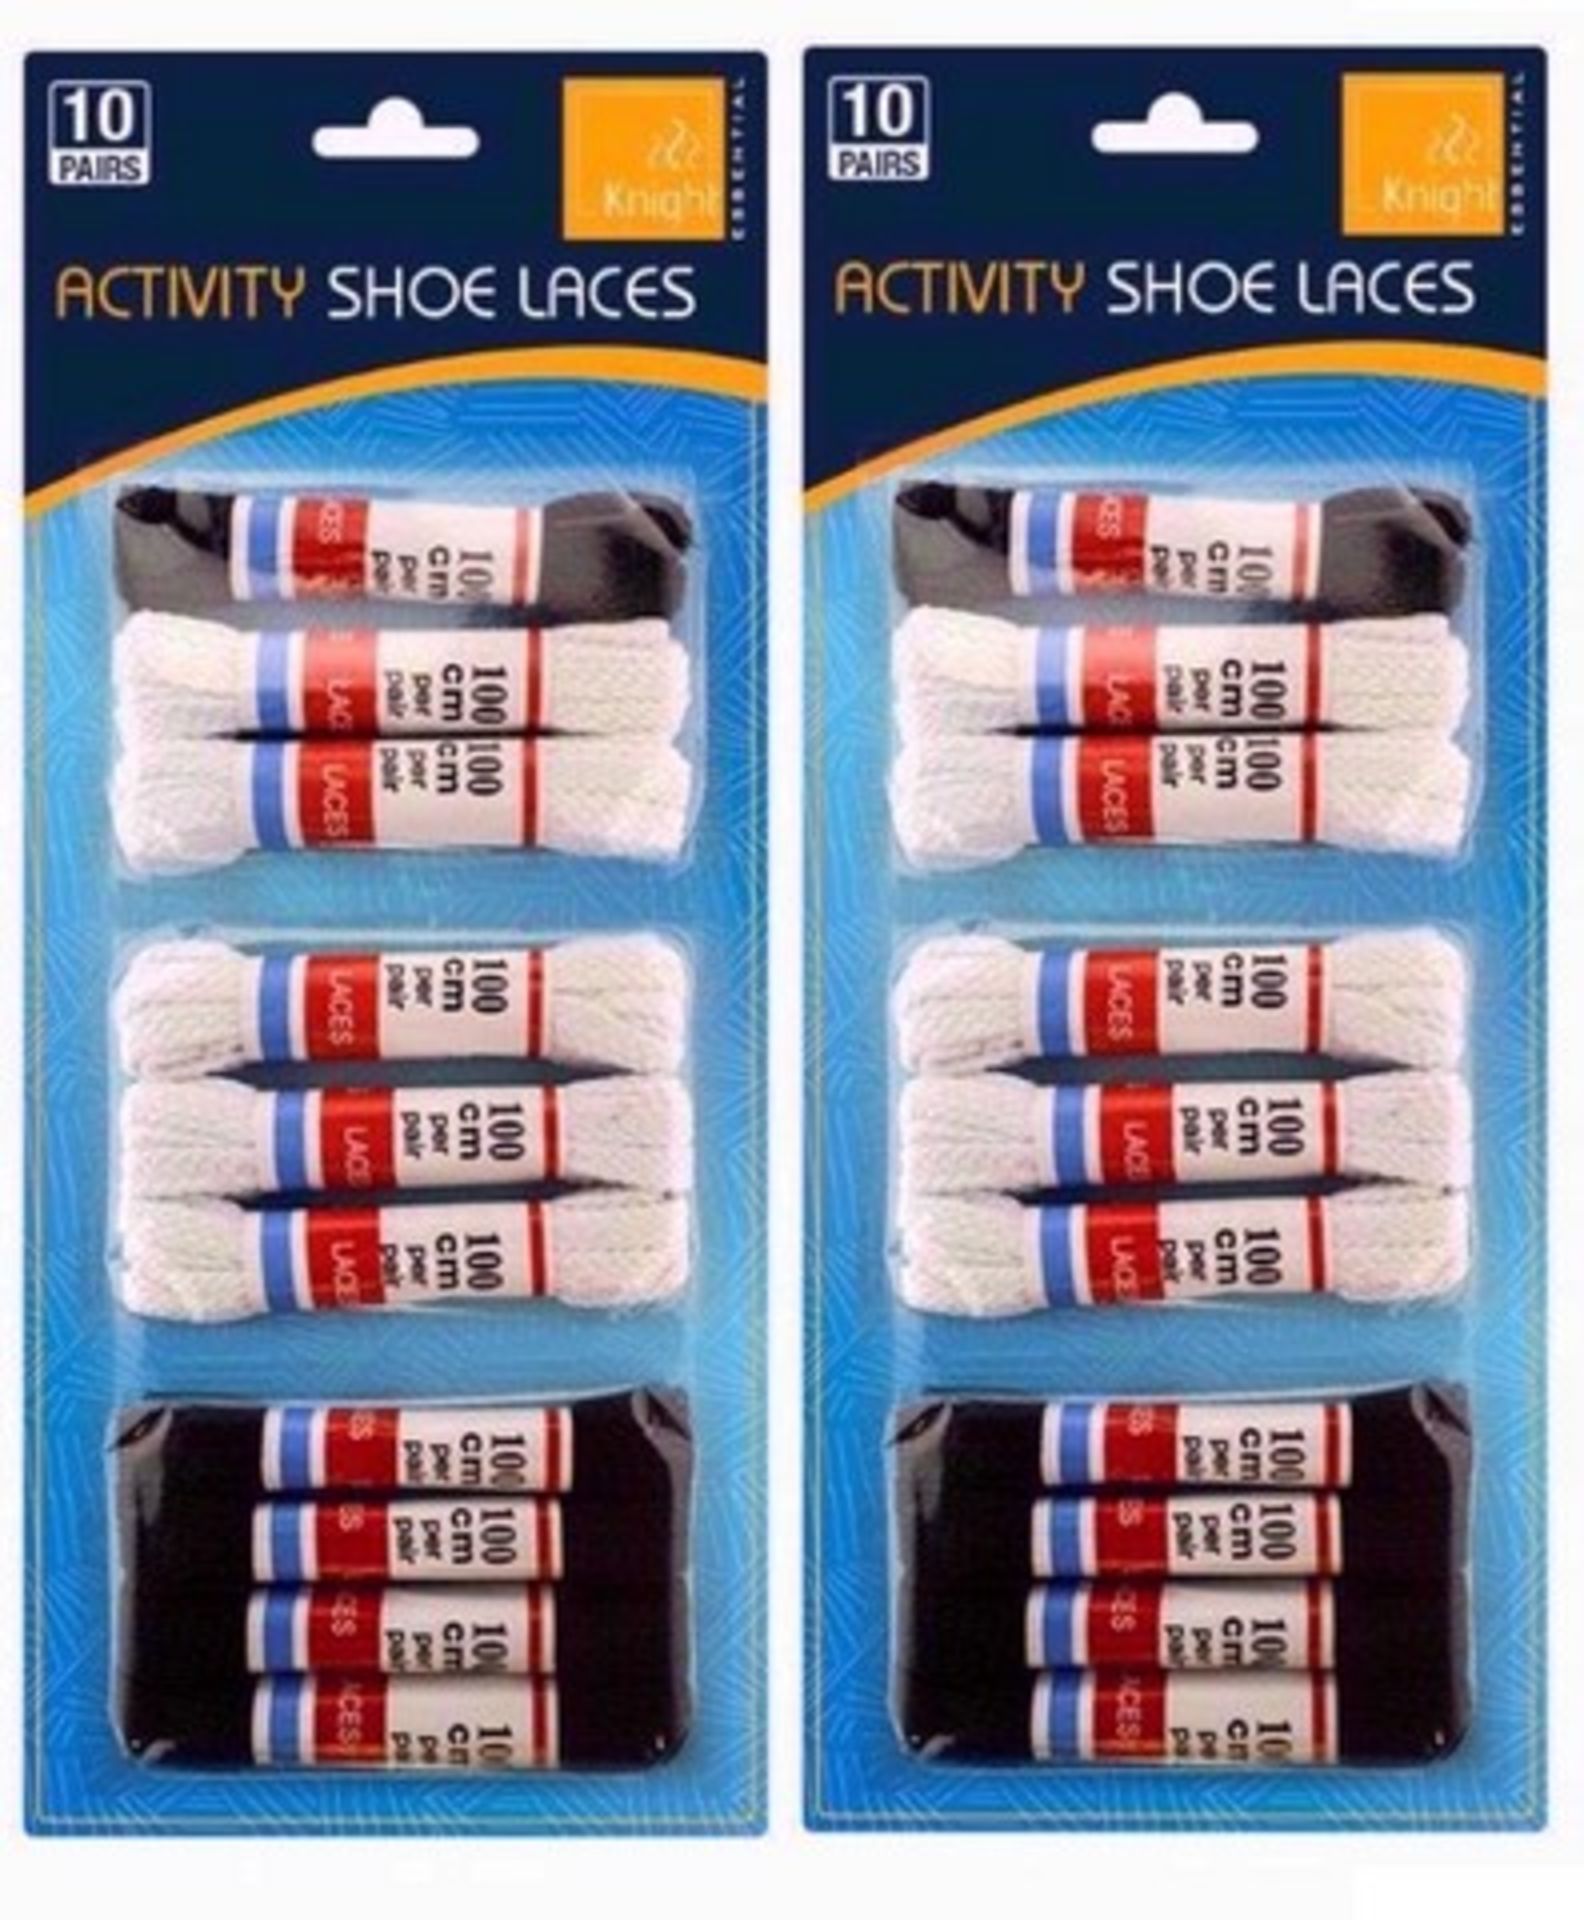 + VAT Brand New 2 Packs Of 10 Pairs Of Activity Shoe Laces - Includes 6 Black and 6 White 100 Cm